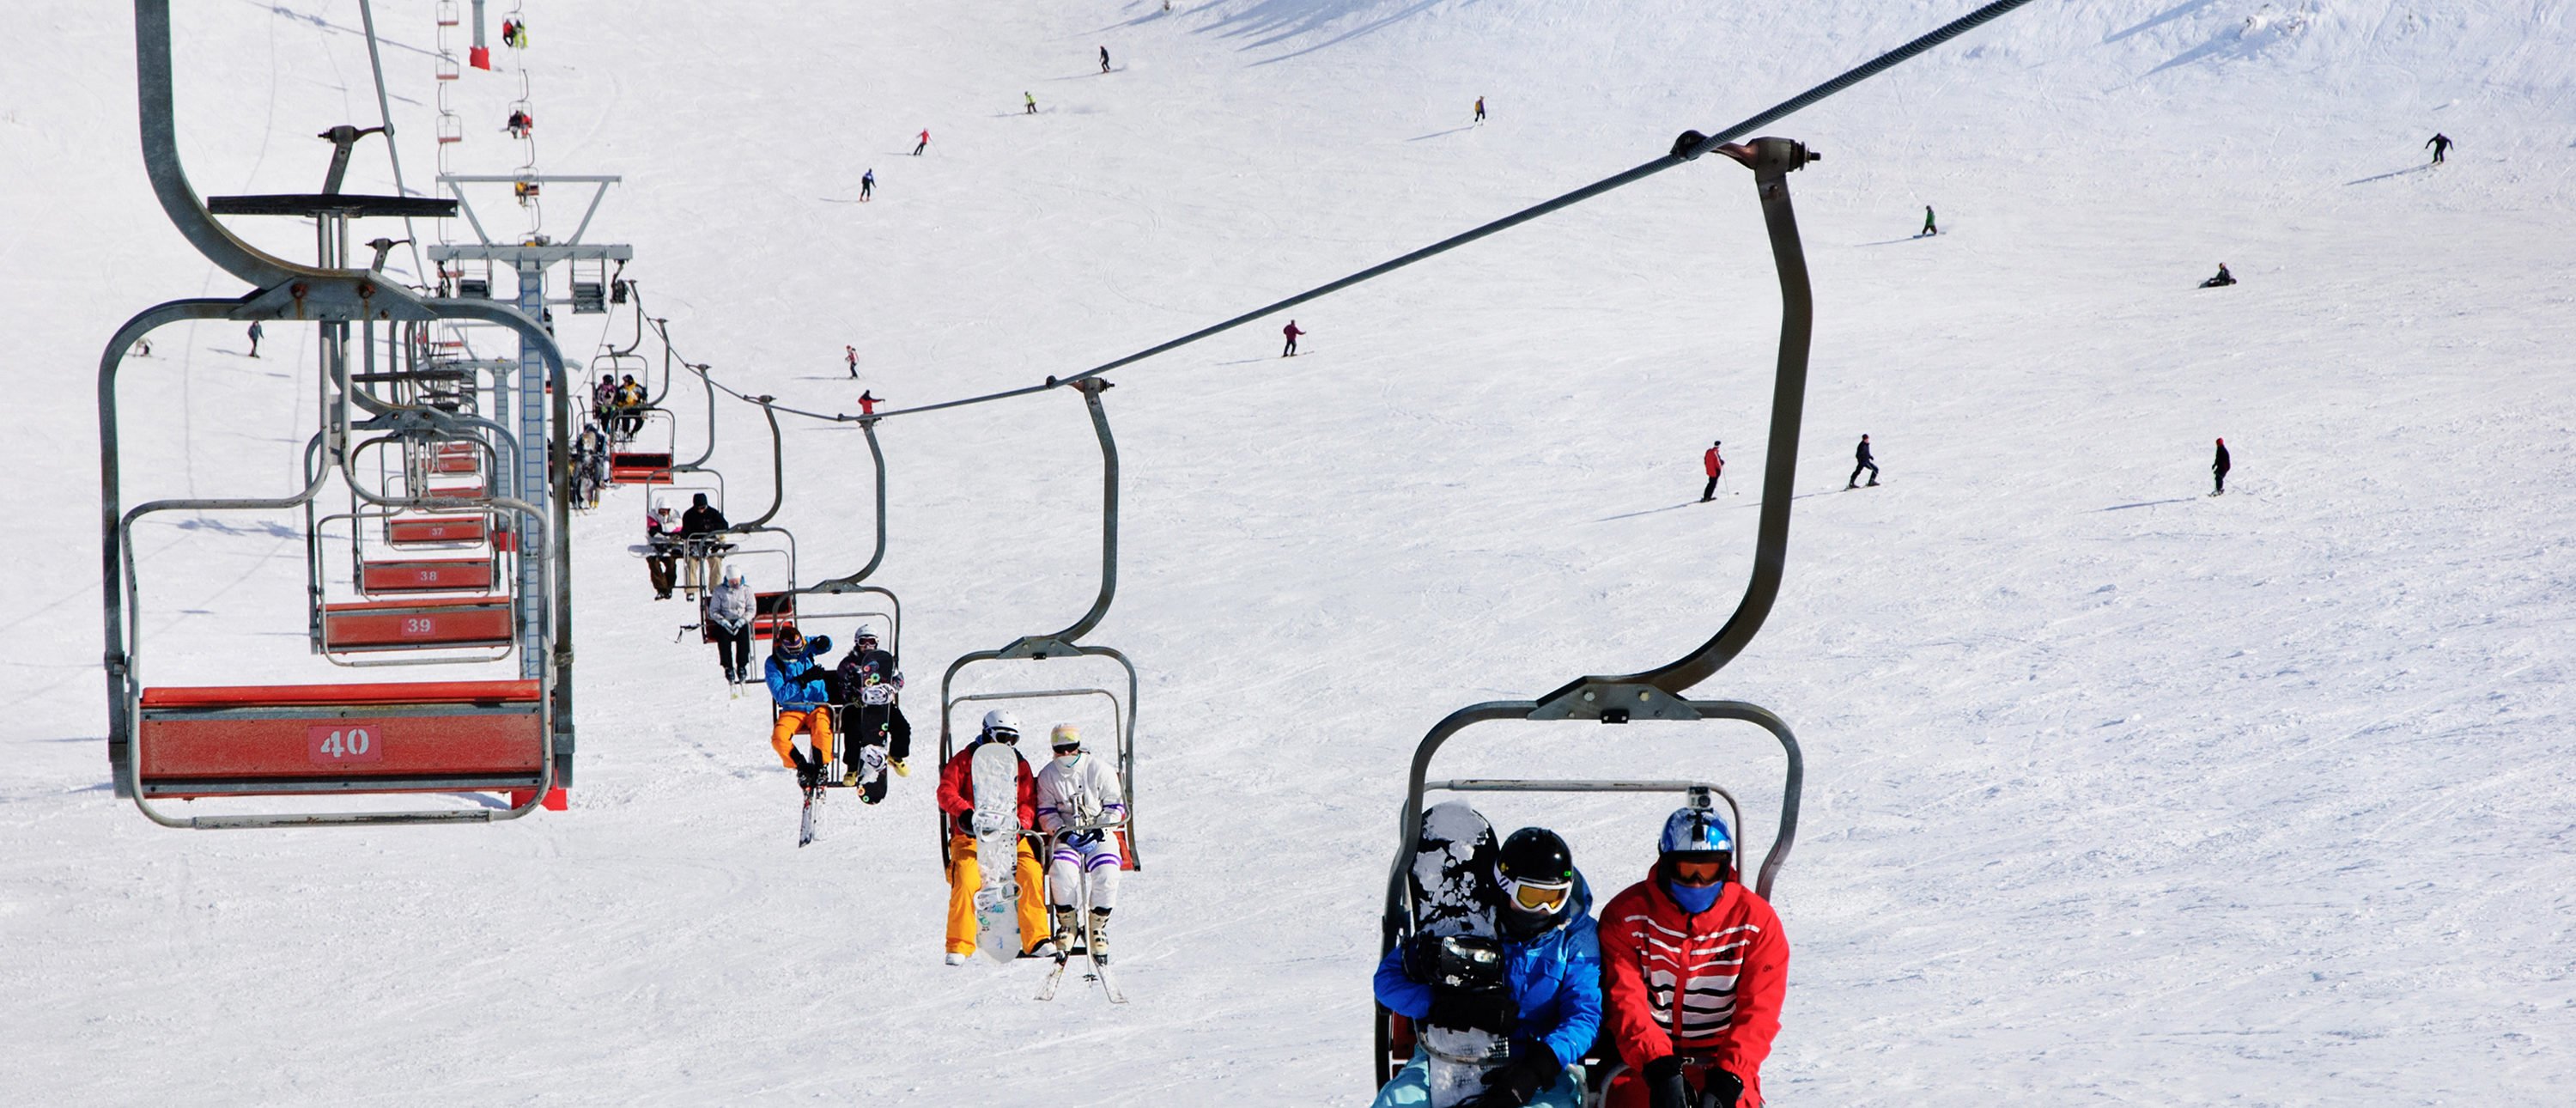 If You Weren’t Afraid Of Ski Lifts Already, You Will Be After Watching